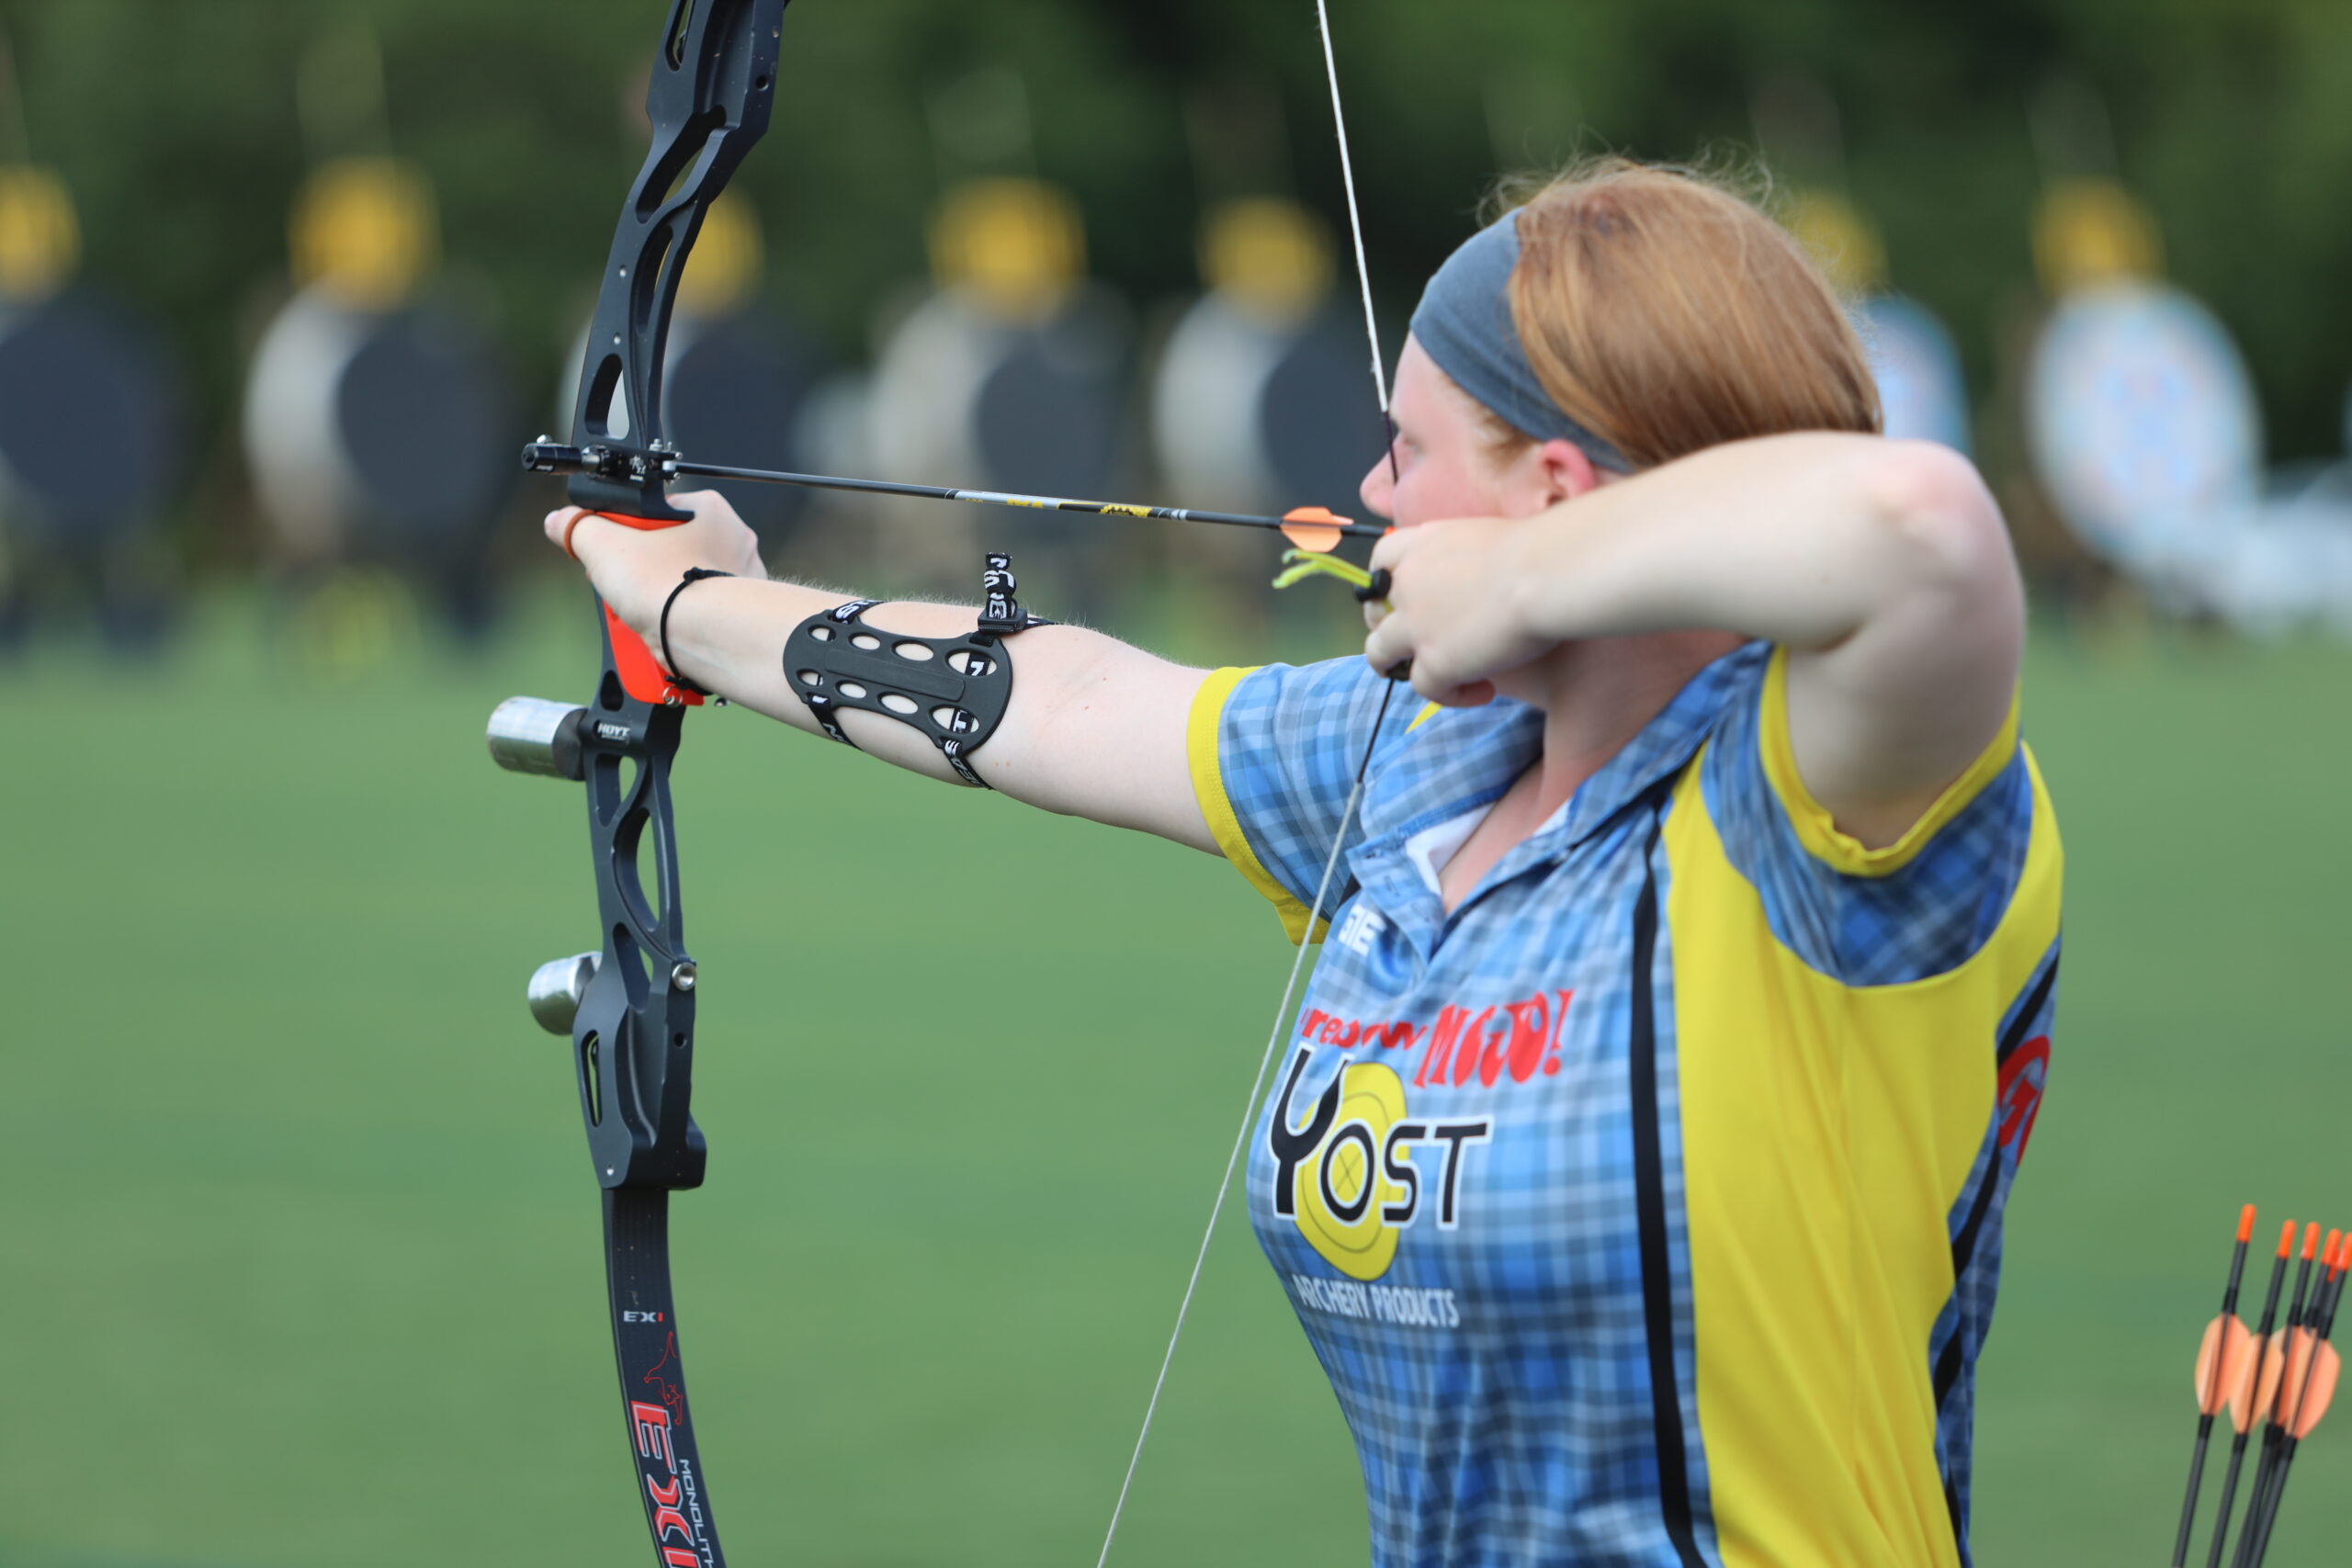 Barebow archery on the rise